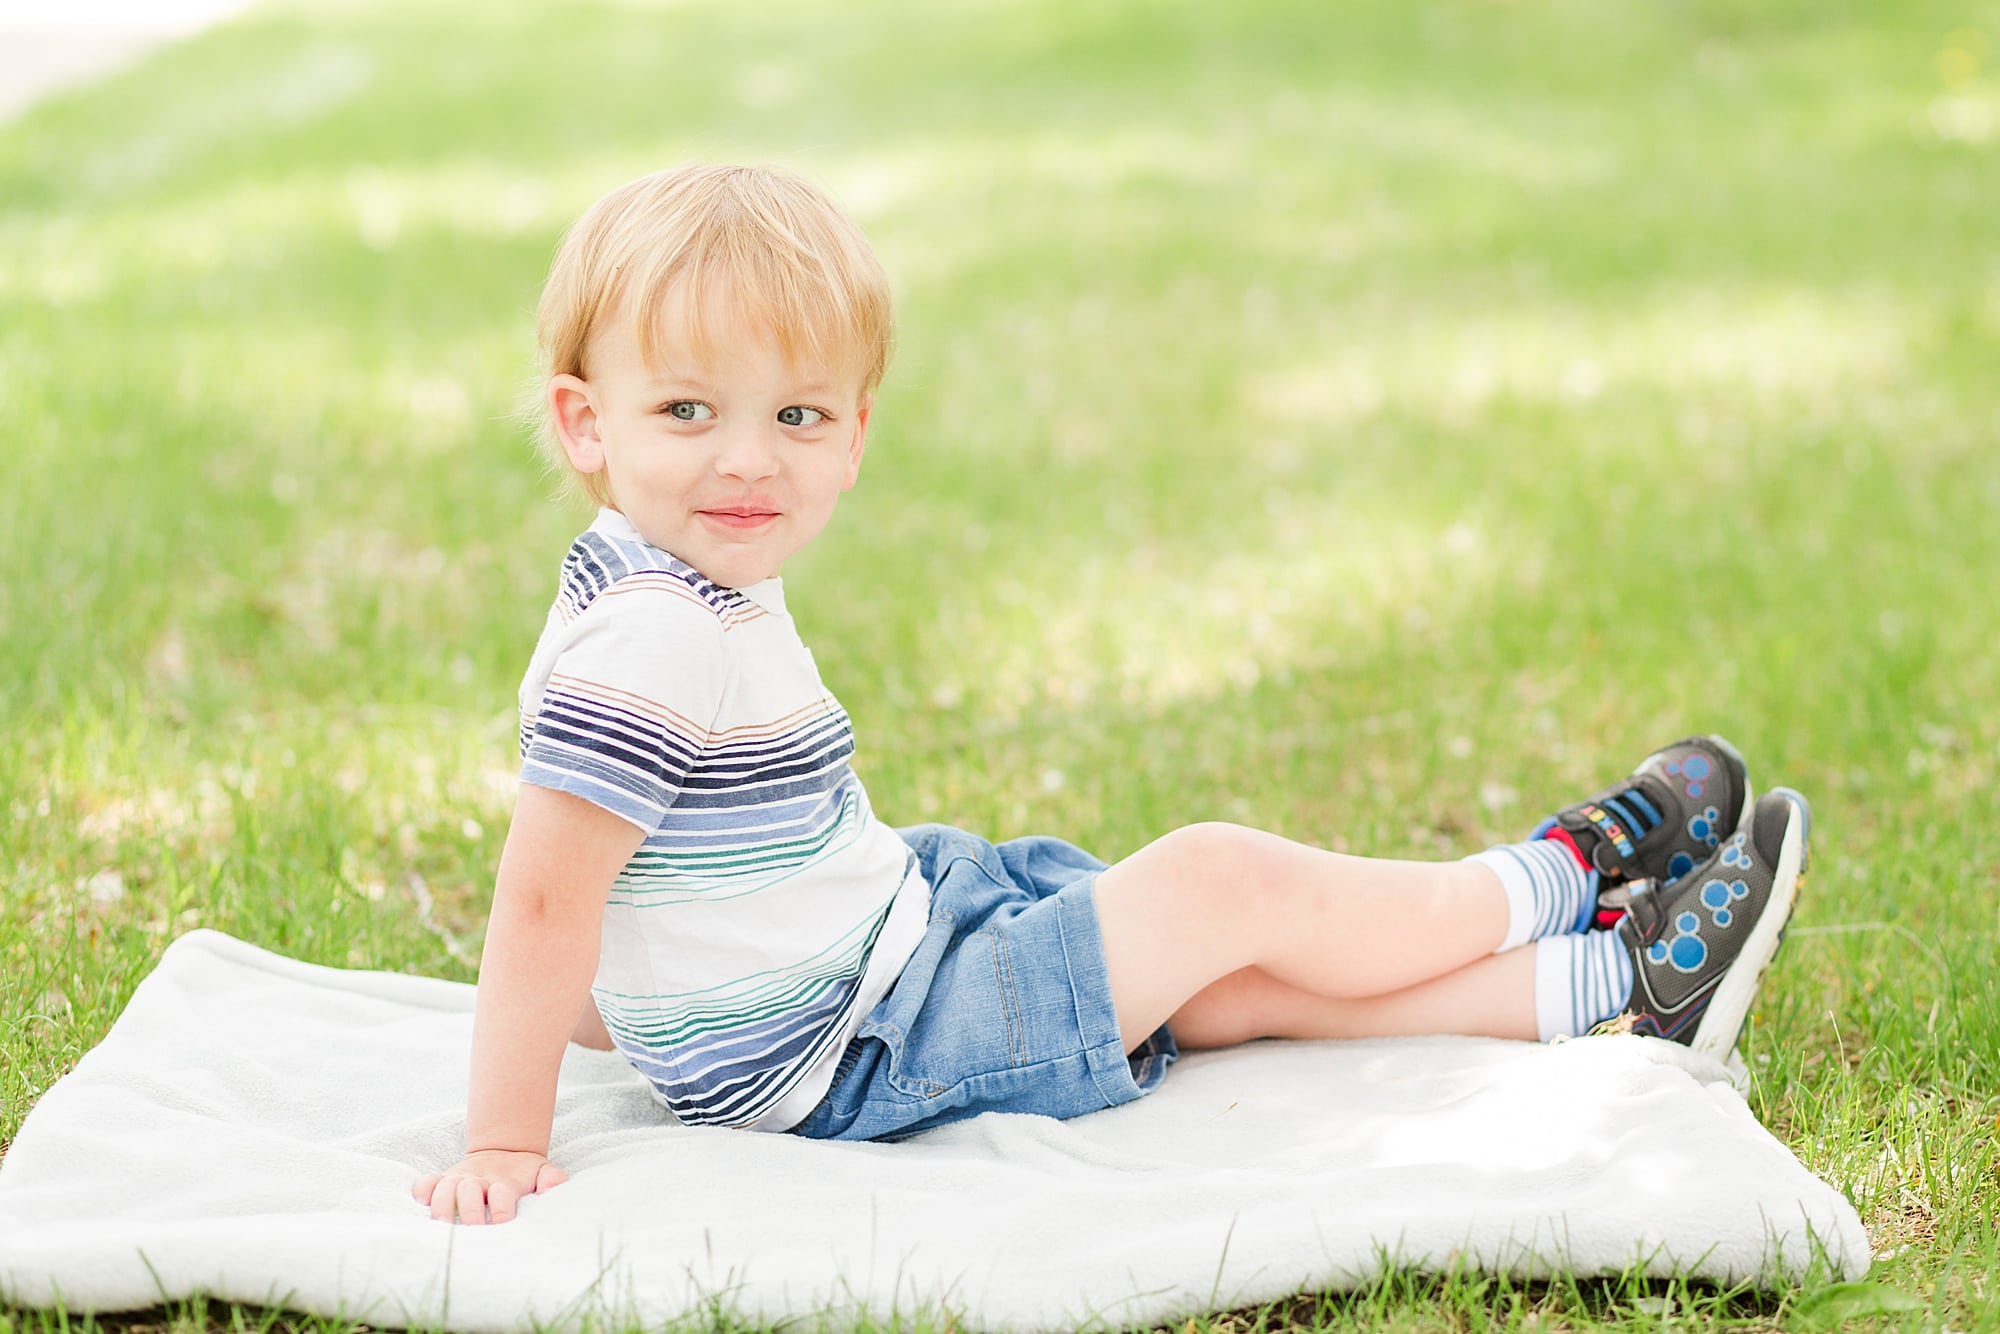 Three year old in striped shirt smiling in the grass